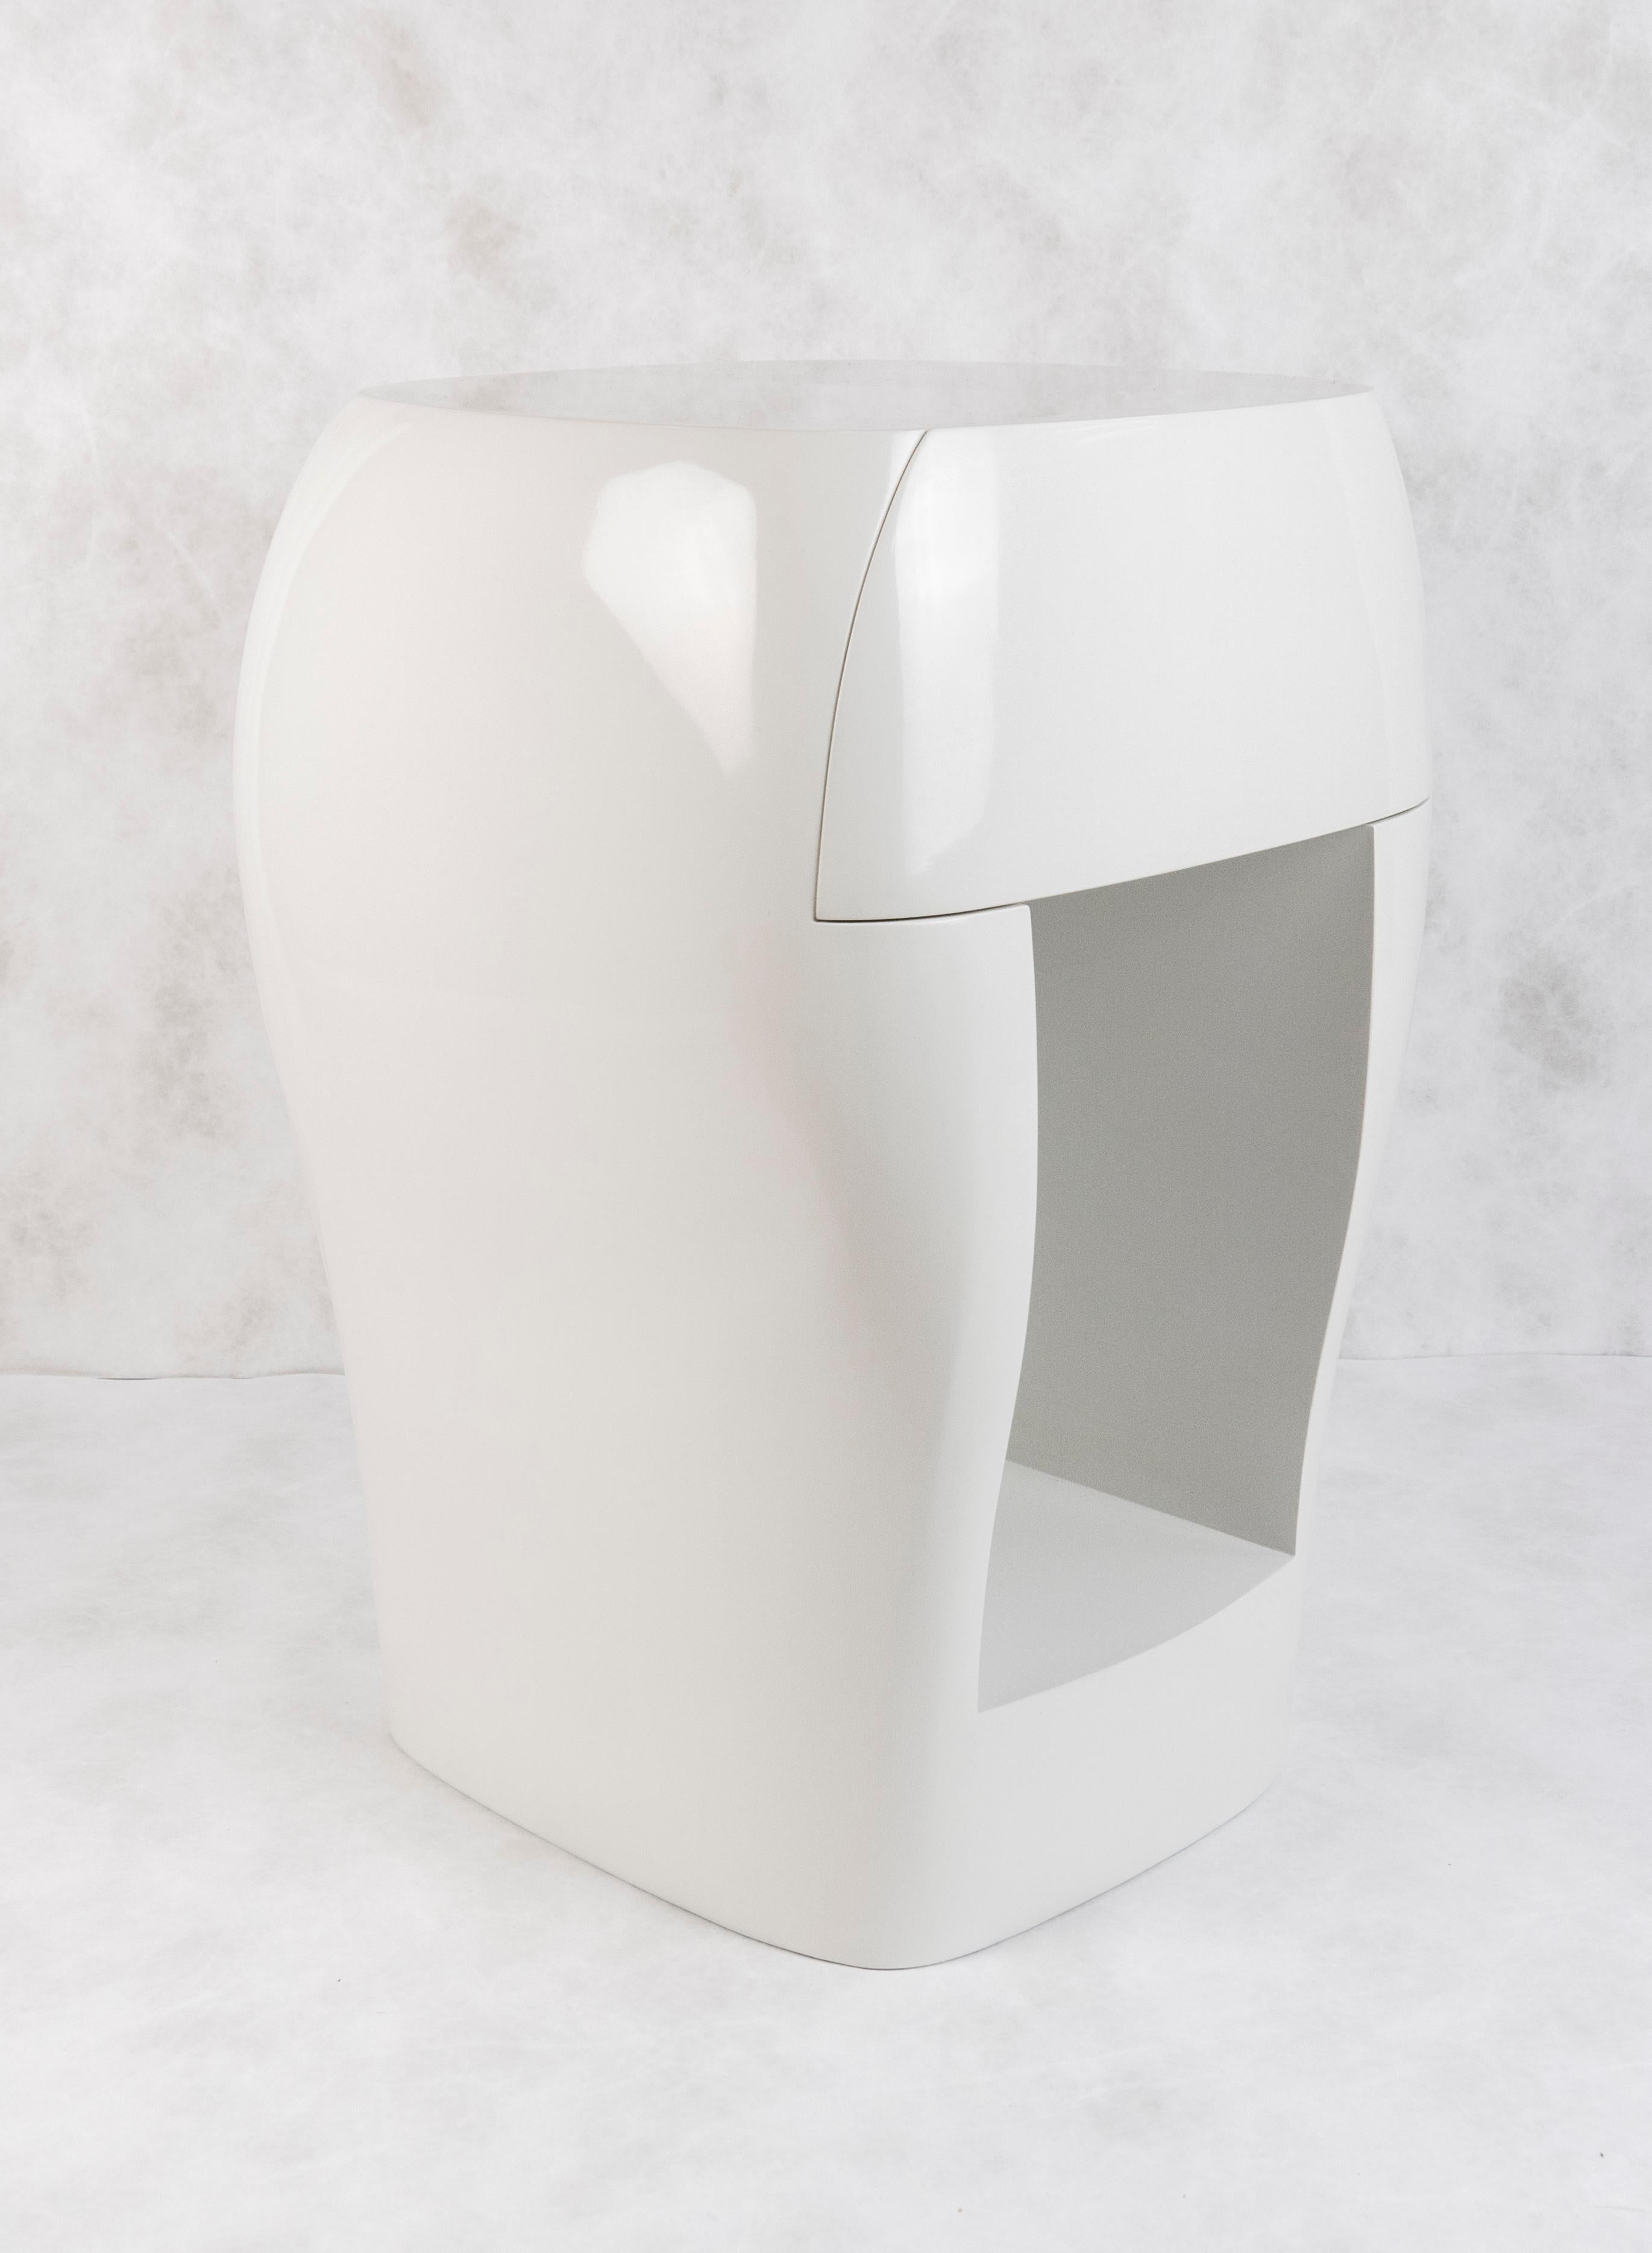 Sculpted bedside tables with drawer by Jacques Jarrige.
Open shelf at the bottom. A work of art.
Pair available.